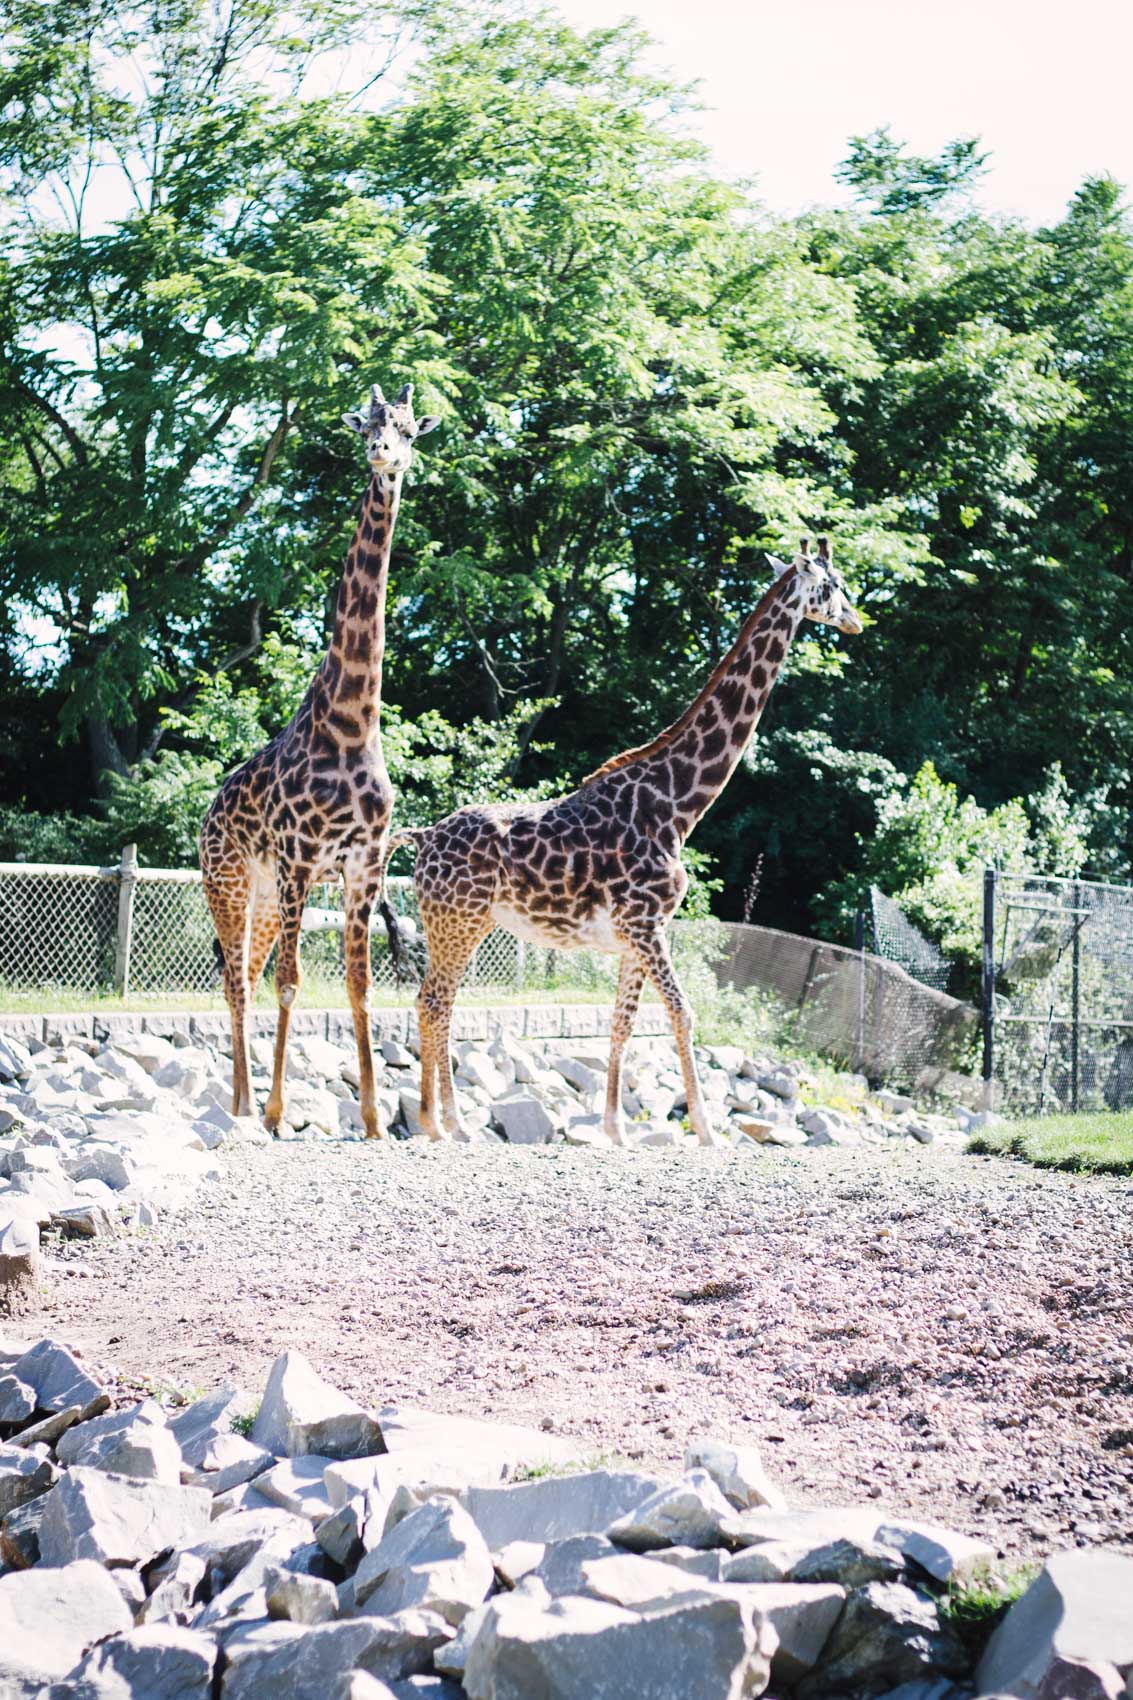 Blogging couple Allyn Lewis and Shaun Novak take you inside their day at the Pittsburgh Zoo, an essnetial summer bucket list item!